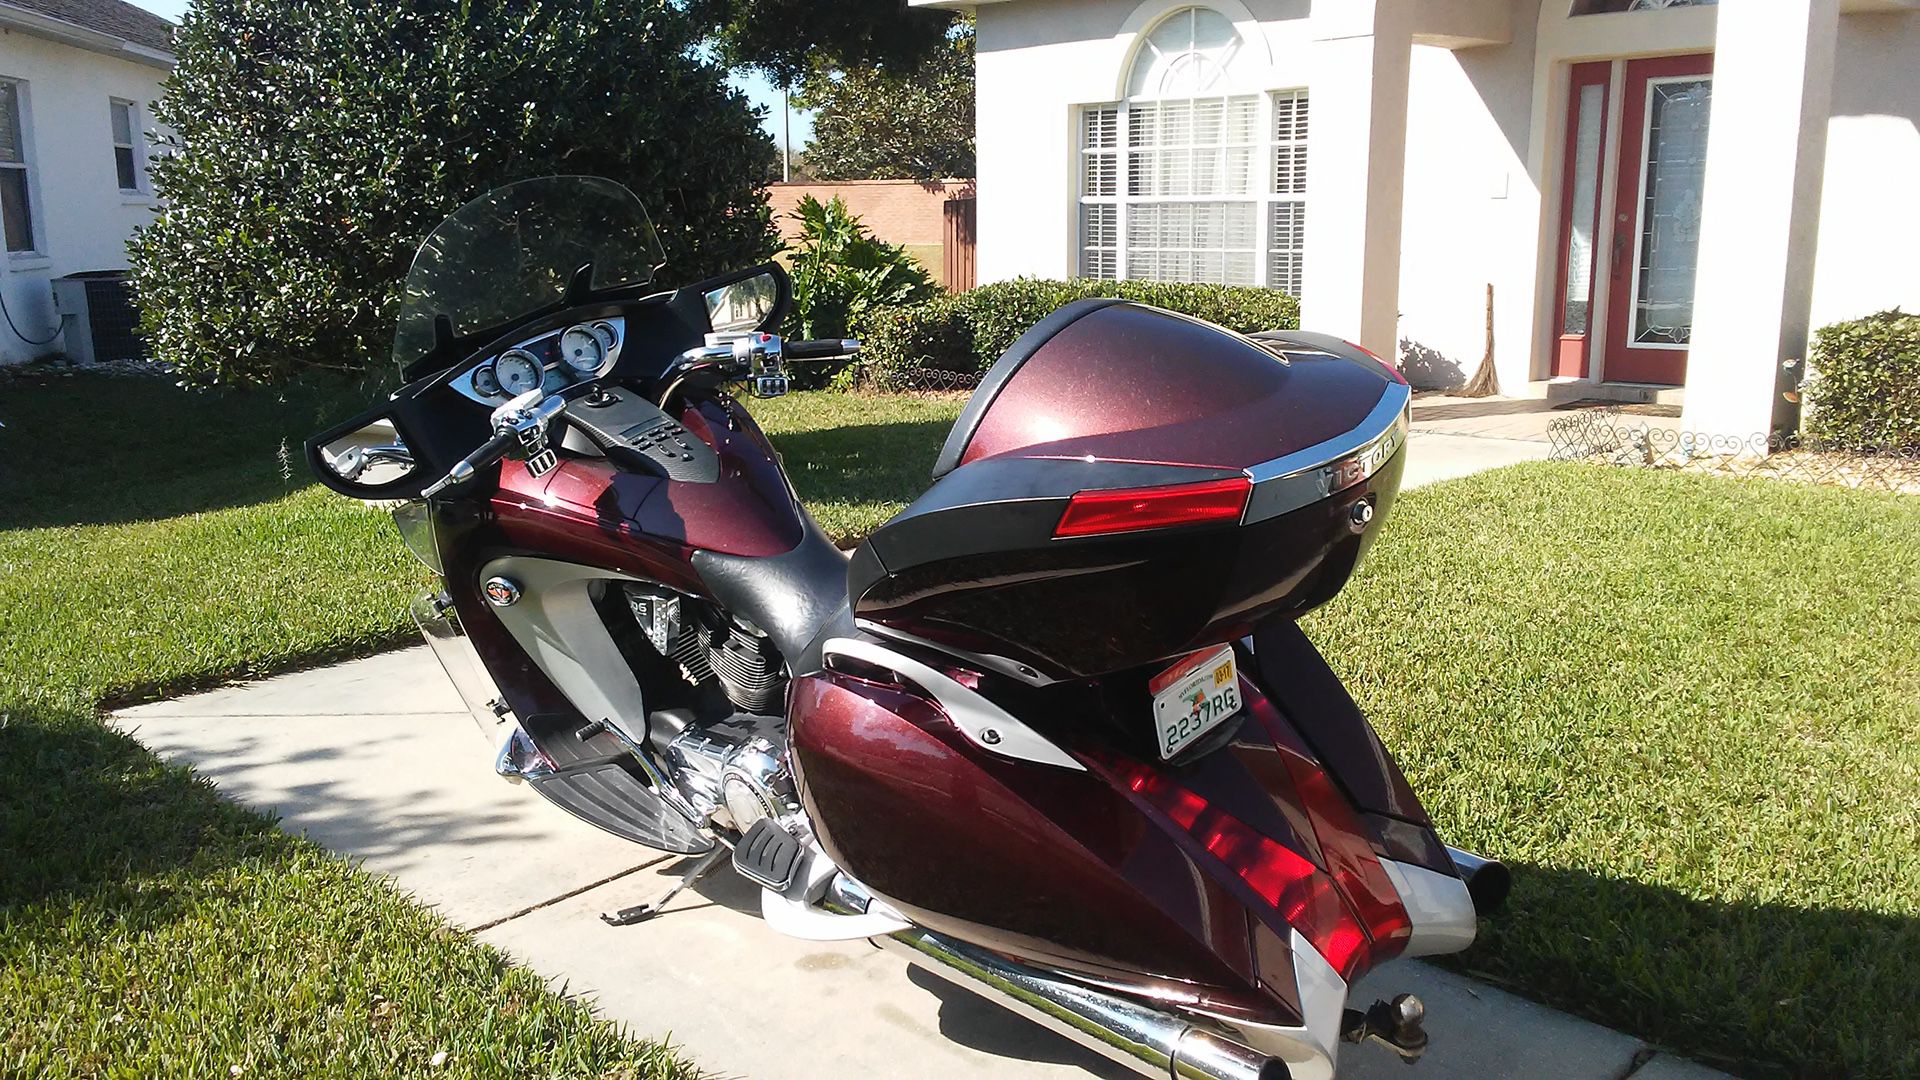 Victory Vision 2008 - Touring motorcycle